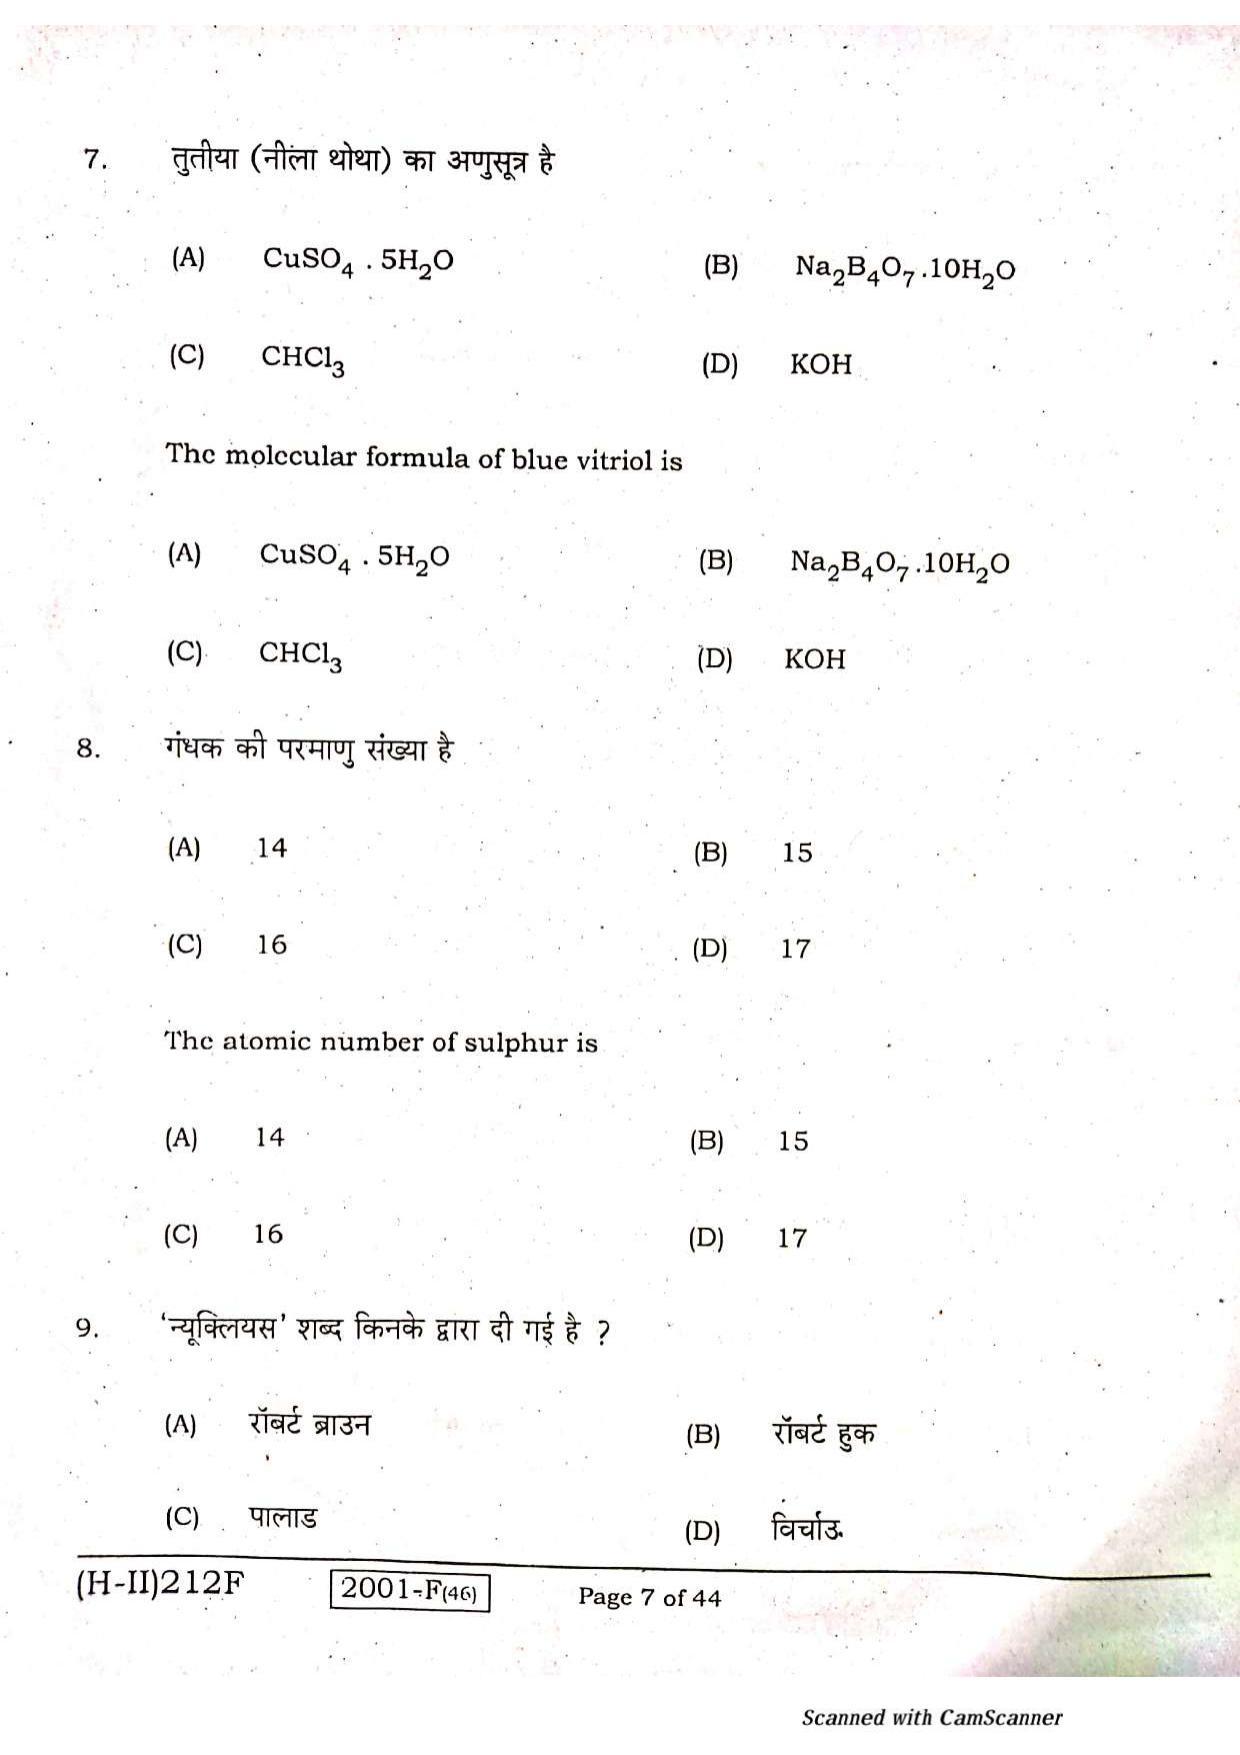 Bihar Board Class 10 Science 2021 (2nd Sitting) Question Paper - Page 5